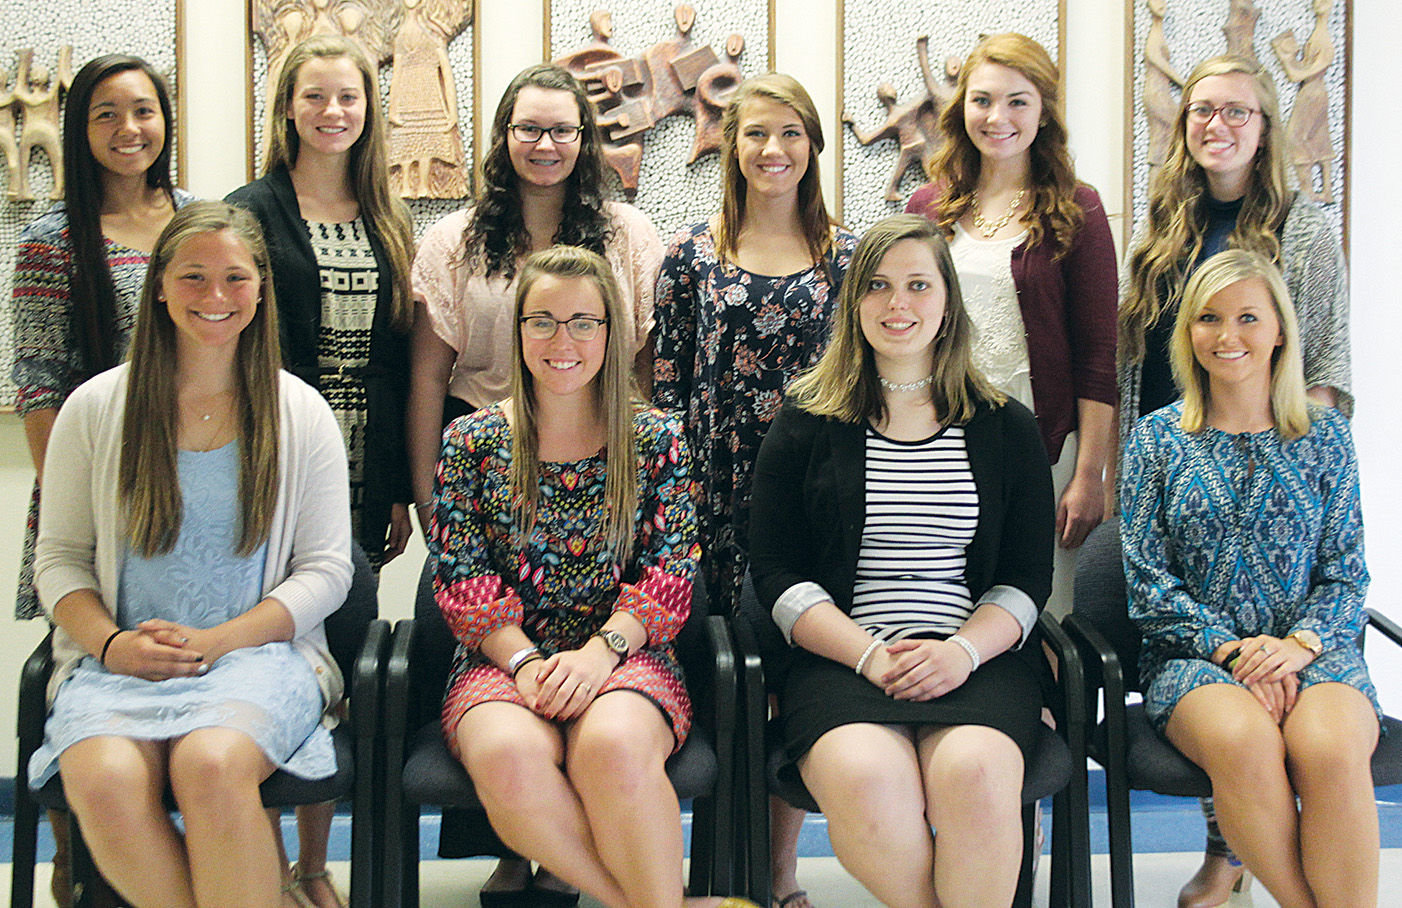 Fountain Central High School Class of 2016 Top Ten students are, from left, front row, Clare McGrady, Abigil Moore, Taylor Bone and Taryn DePugh; back row, Chynna Yager, Cacy Zeller, Lauren Tooker, Taylor Dunlap, Lauren Bowling and Jordan Lindquist.